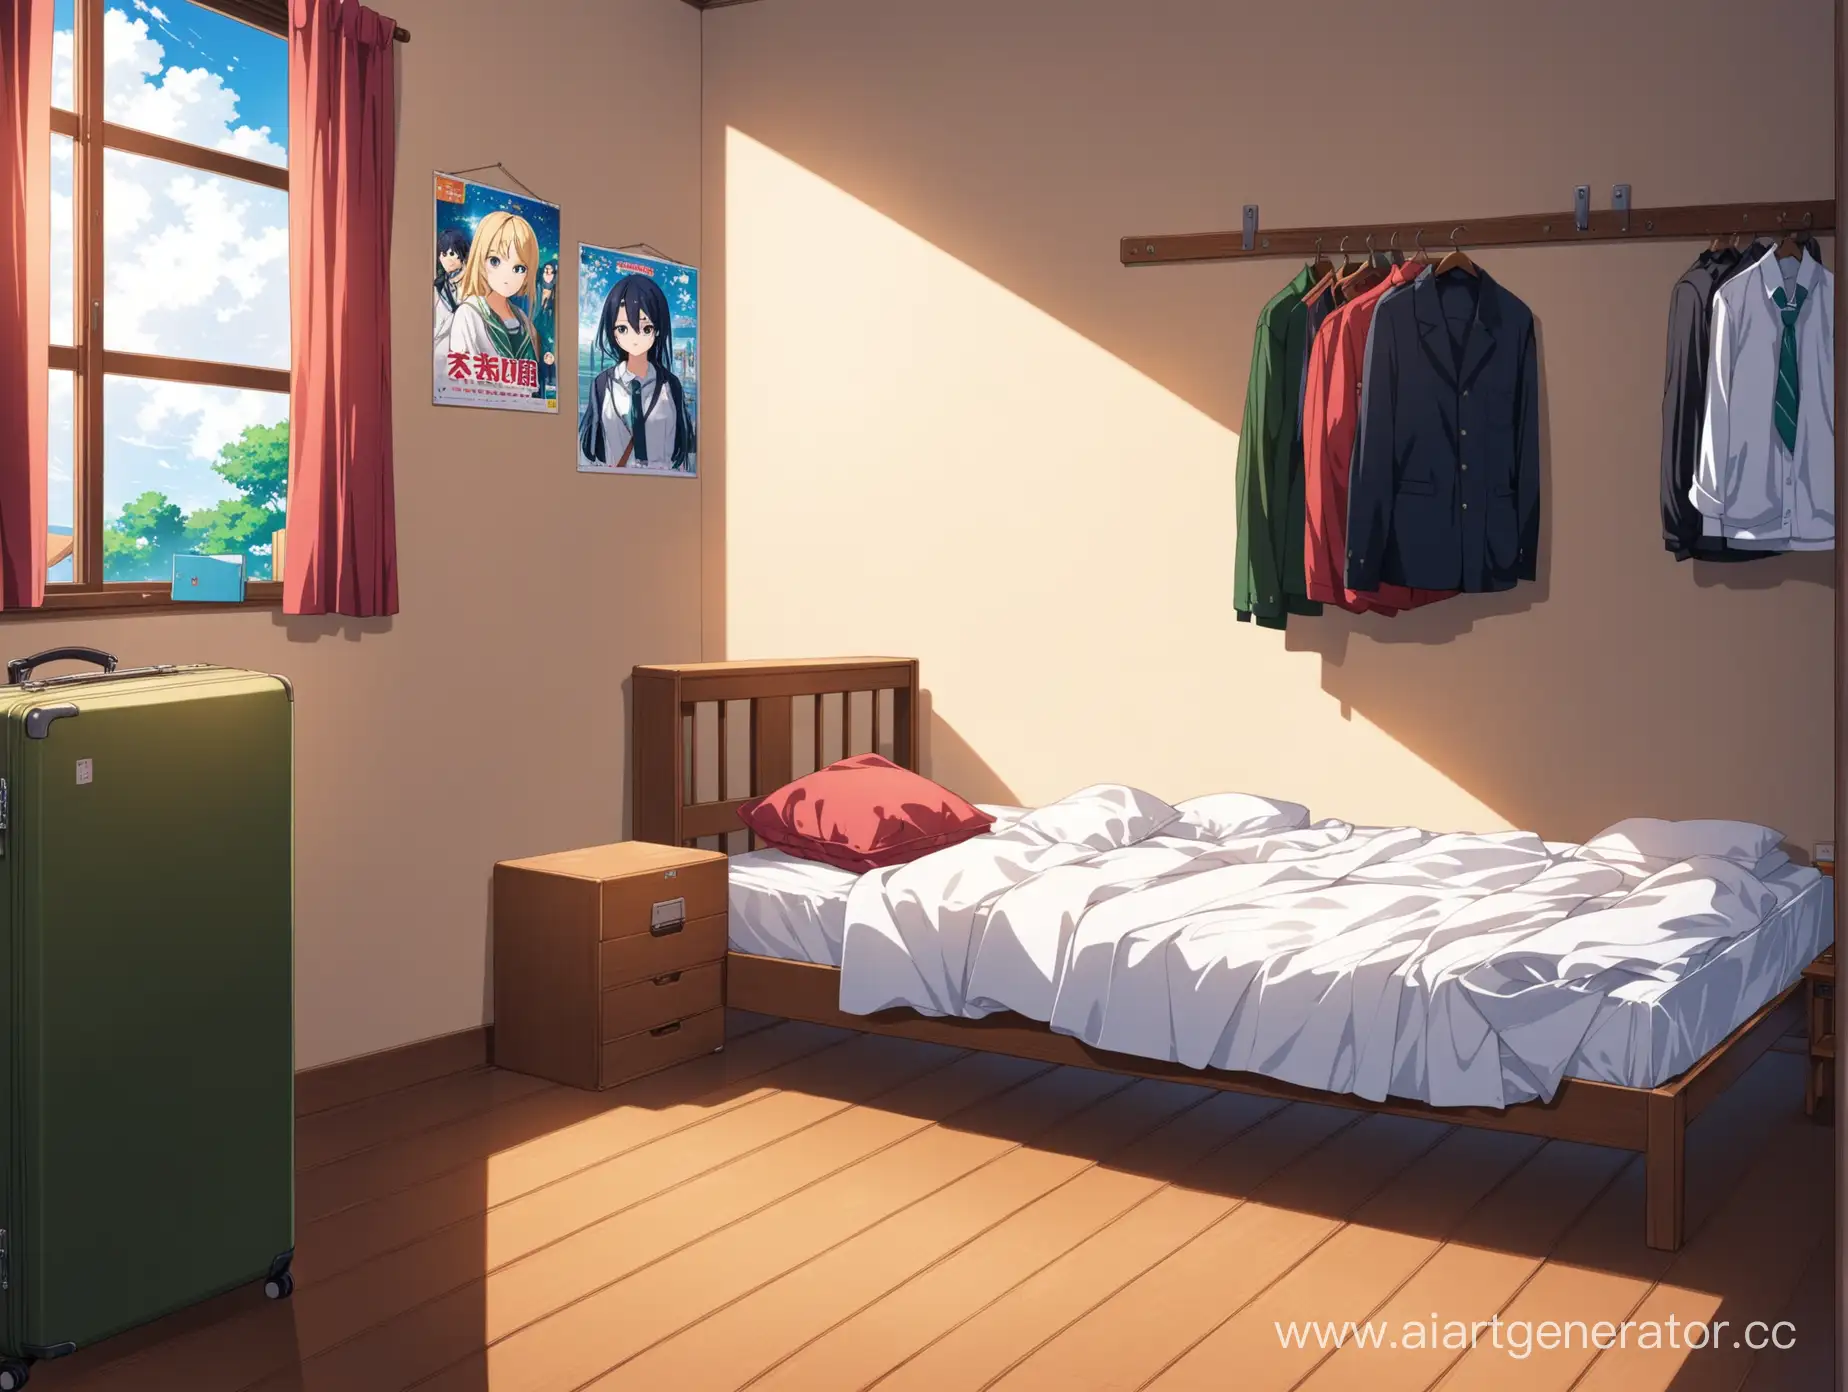 Teenagers-Room-with-Anime-Posters-Unmade-Bed-and-Packed-Suitcase